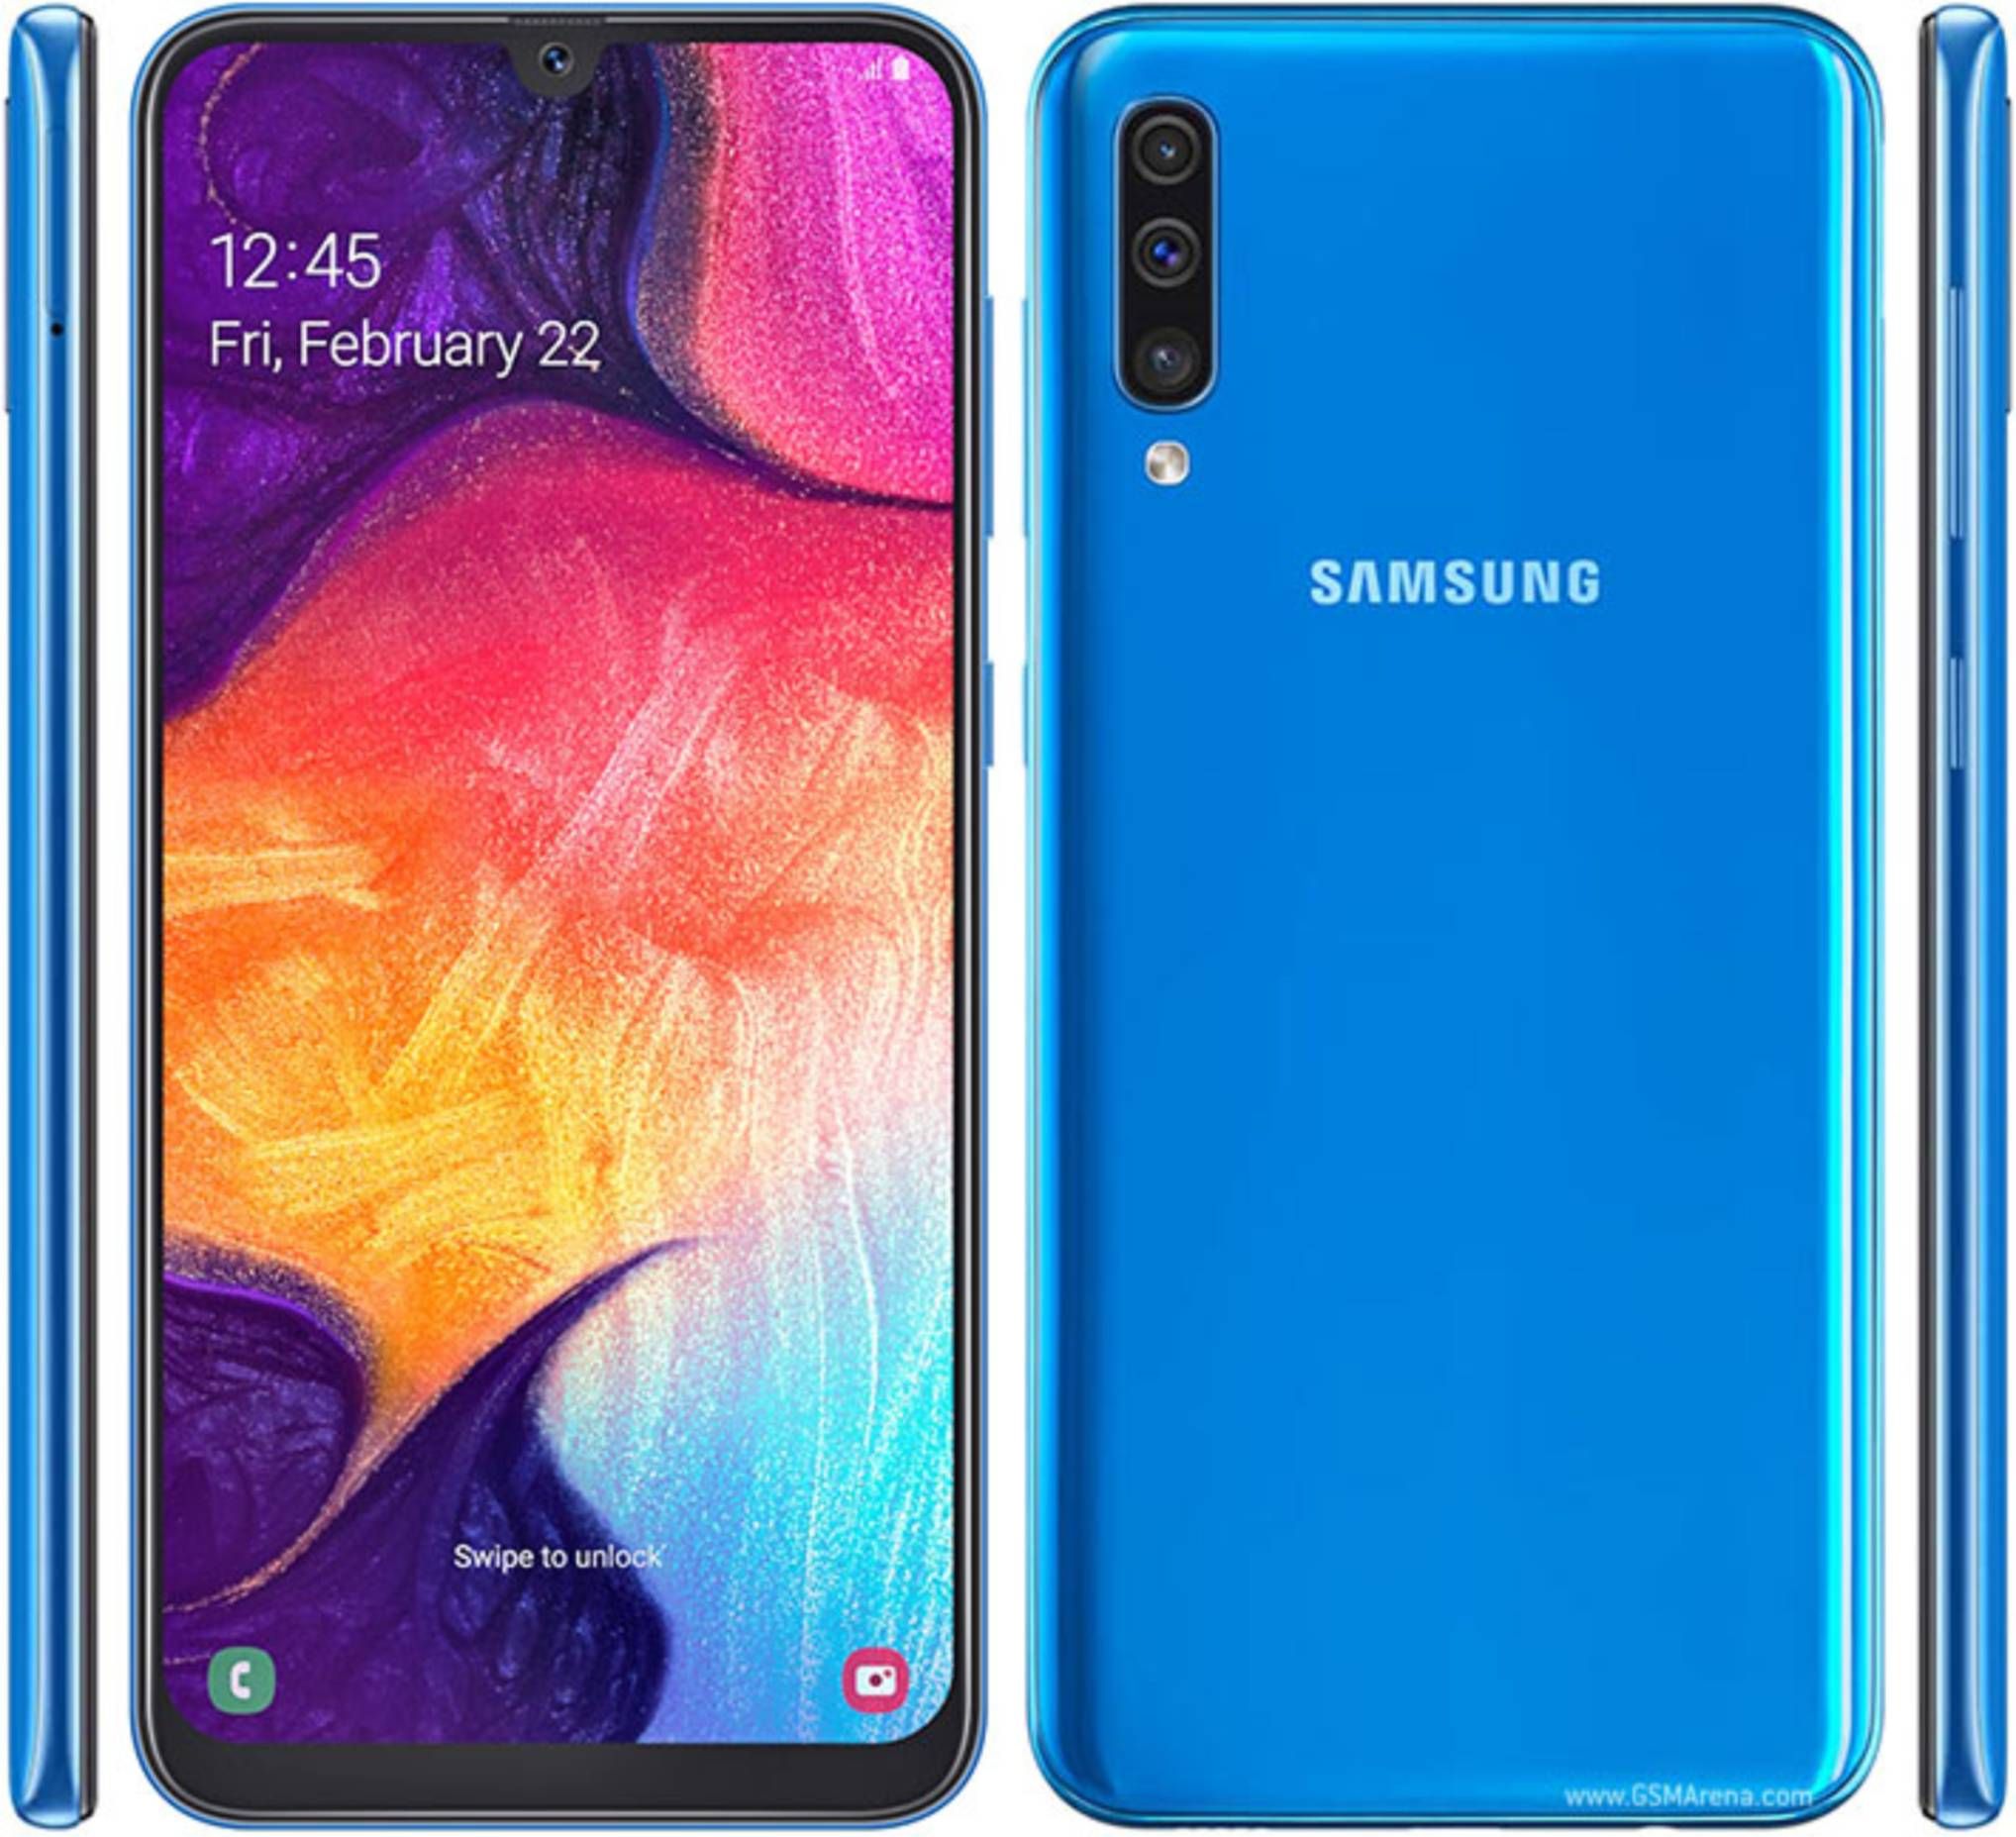 Samsung Galaxy A50 Specifications and Price in Eldoret 